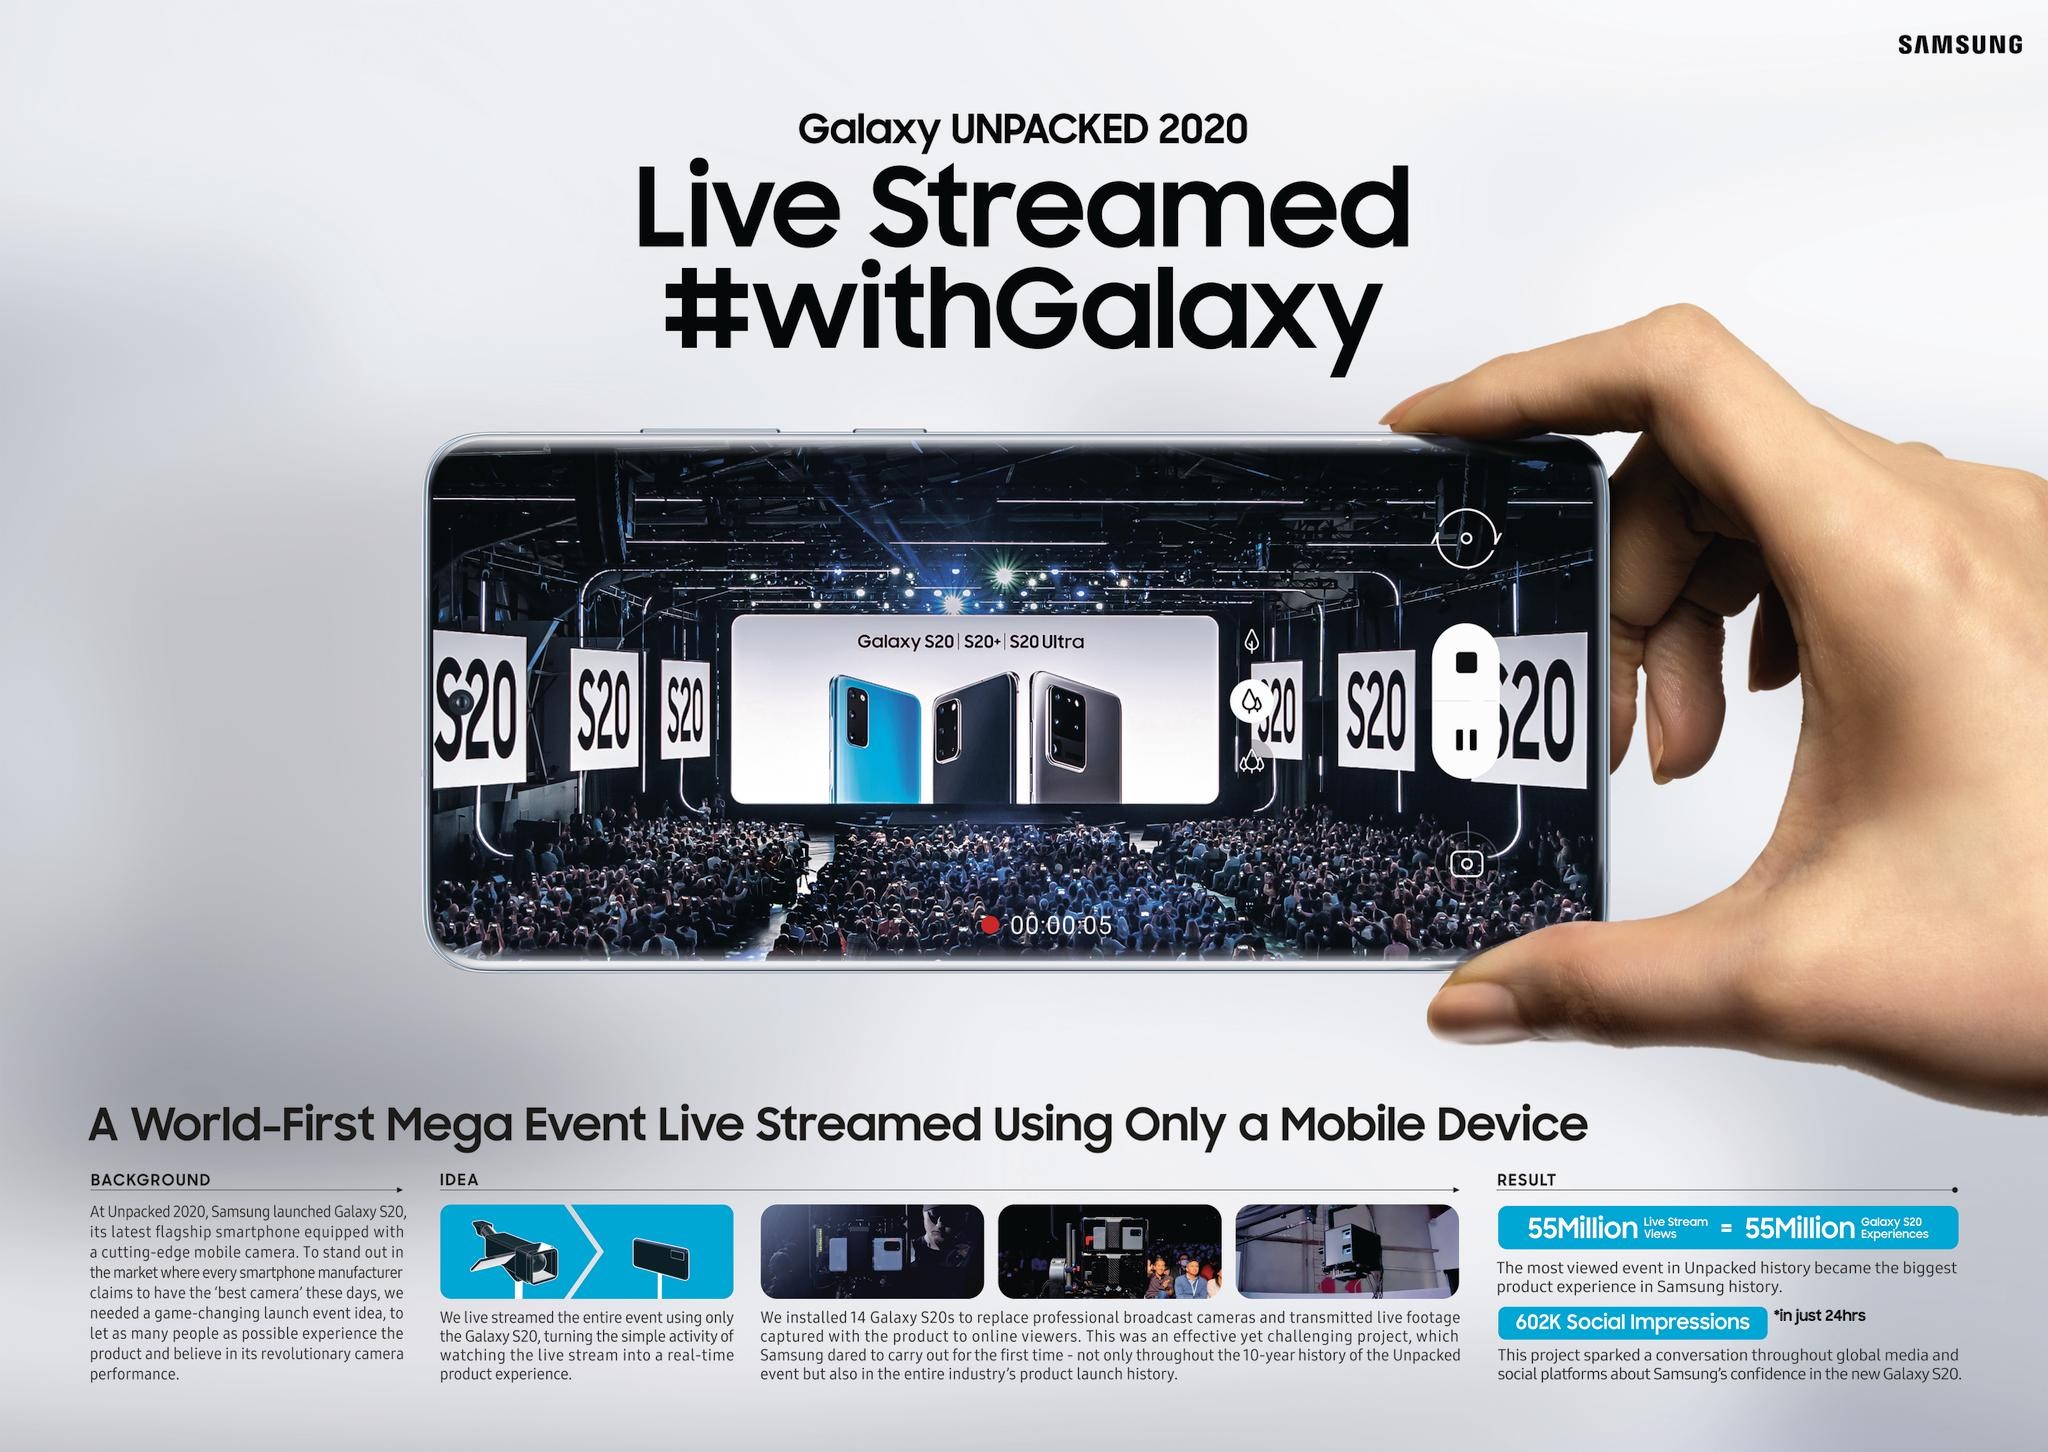 Live streamed #withGalaxy